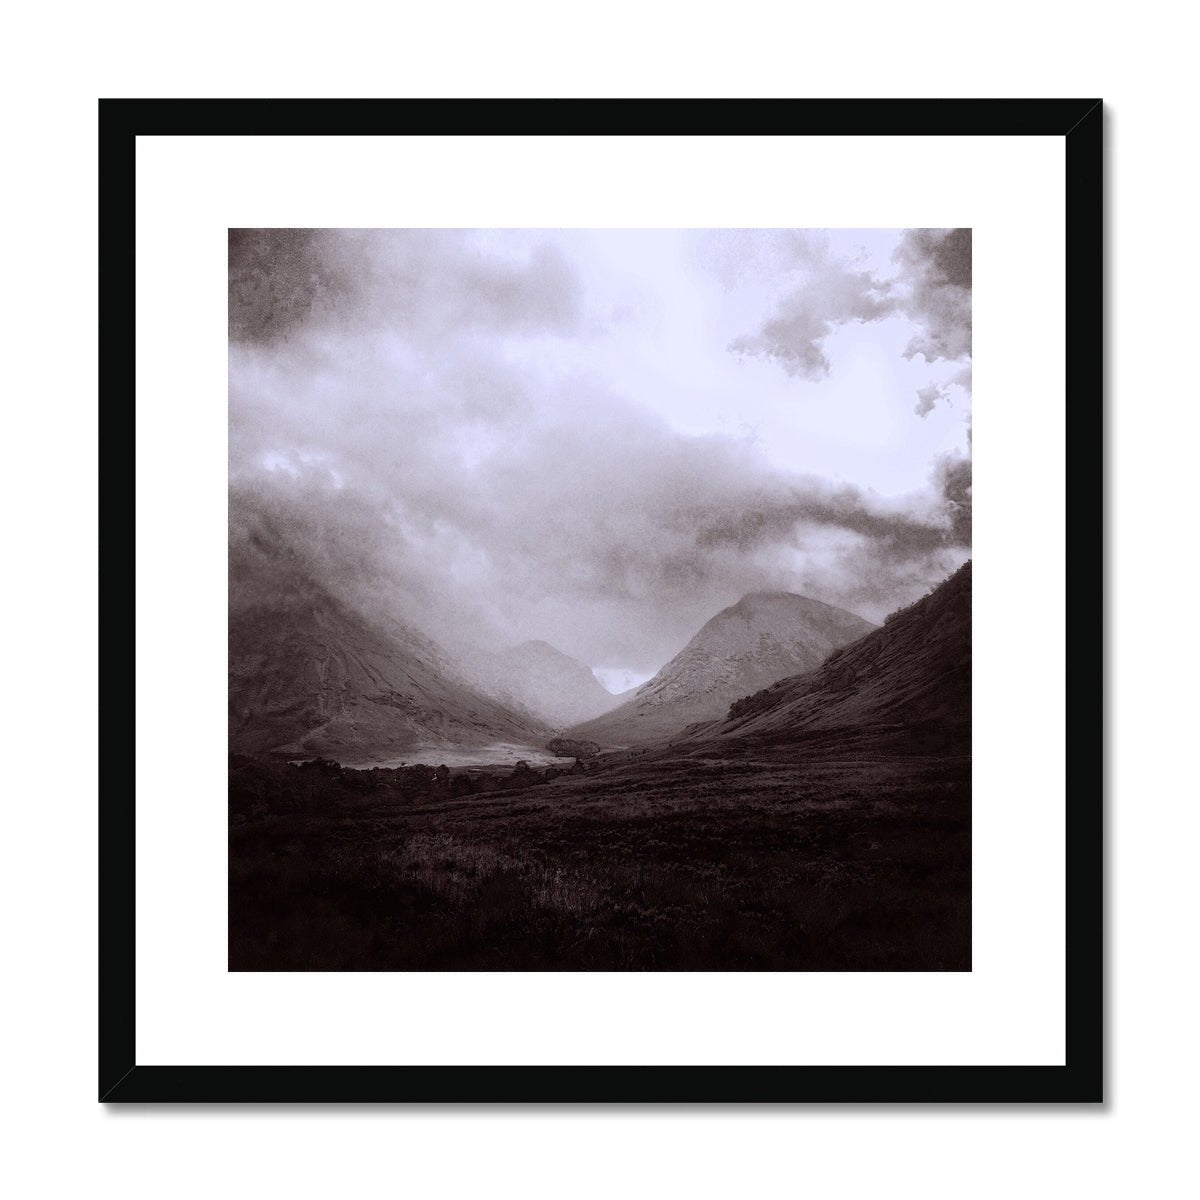 Glencoe Mist Painting | Framed & Mounted Prints From Scotland-Framed & Mounted Prints-Glencoe Art Gallery-20"x20"-Black Frame-Paintings, Prints, Homeware, Art Gifts From Scotland By Scottish Artist Kevin Hunter